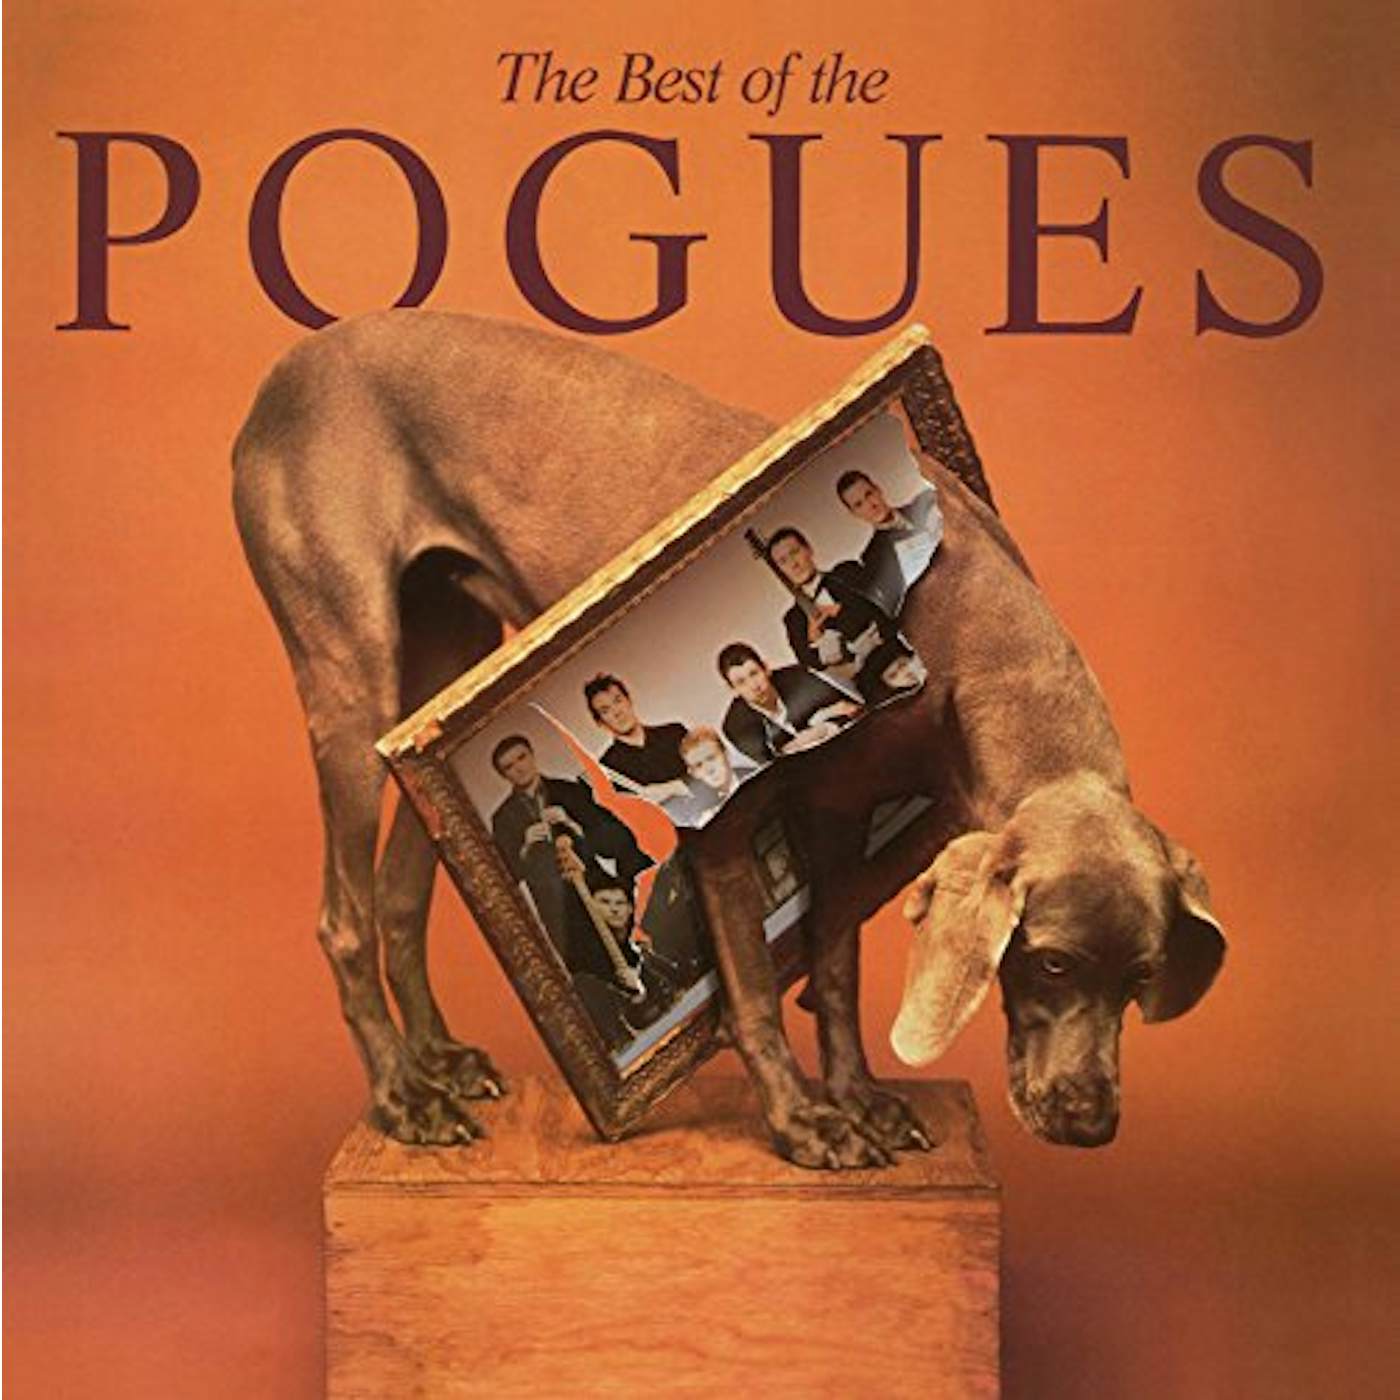 BEST OF THE POGUES (BACK TO THE 80'S EXCLUSIVE) Vinyl Record